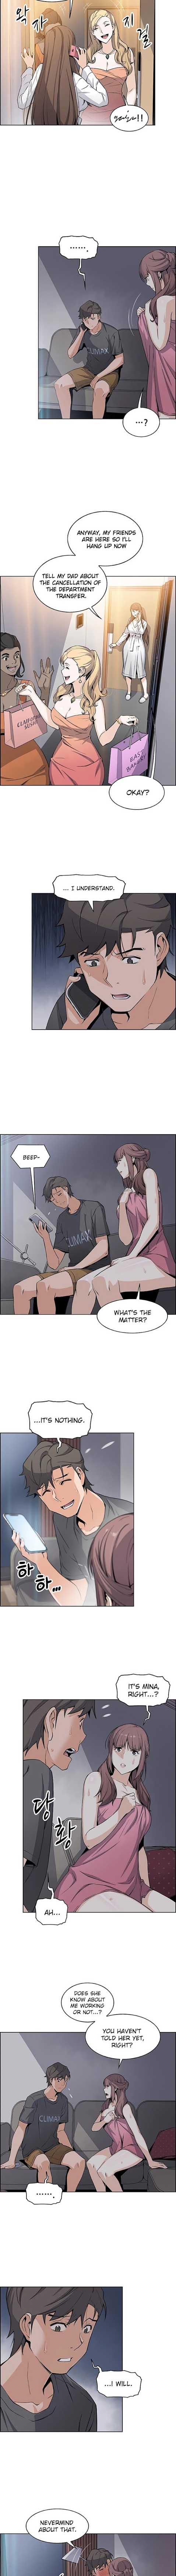 Housekeeper [Neck Pillow, Paper] Ch.49/49 [English] [Manhwa PDF] Completed 262